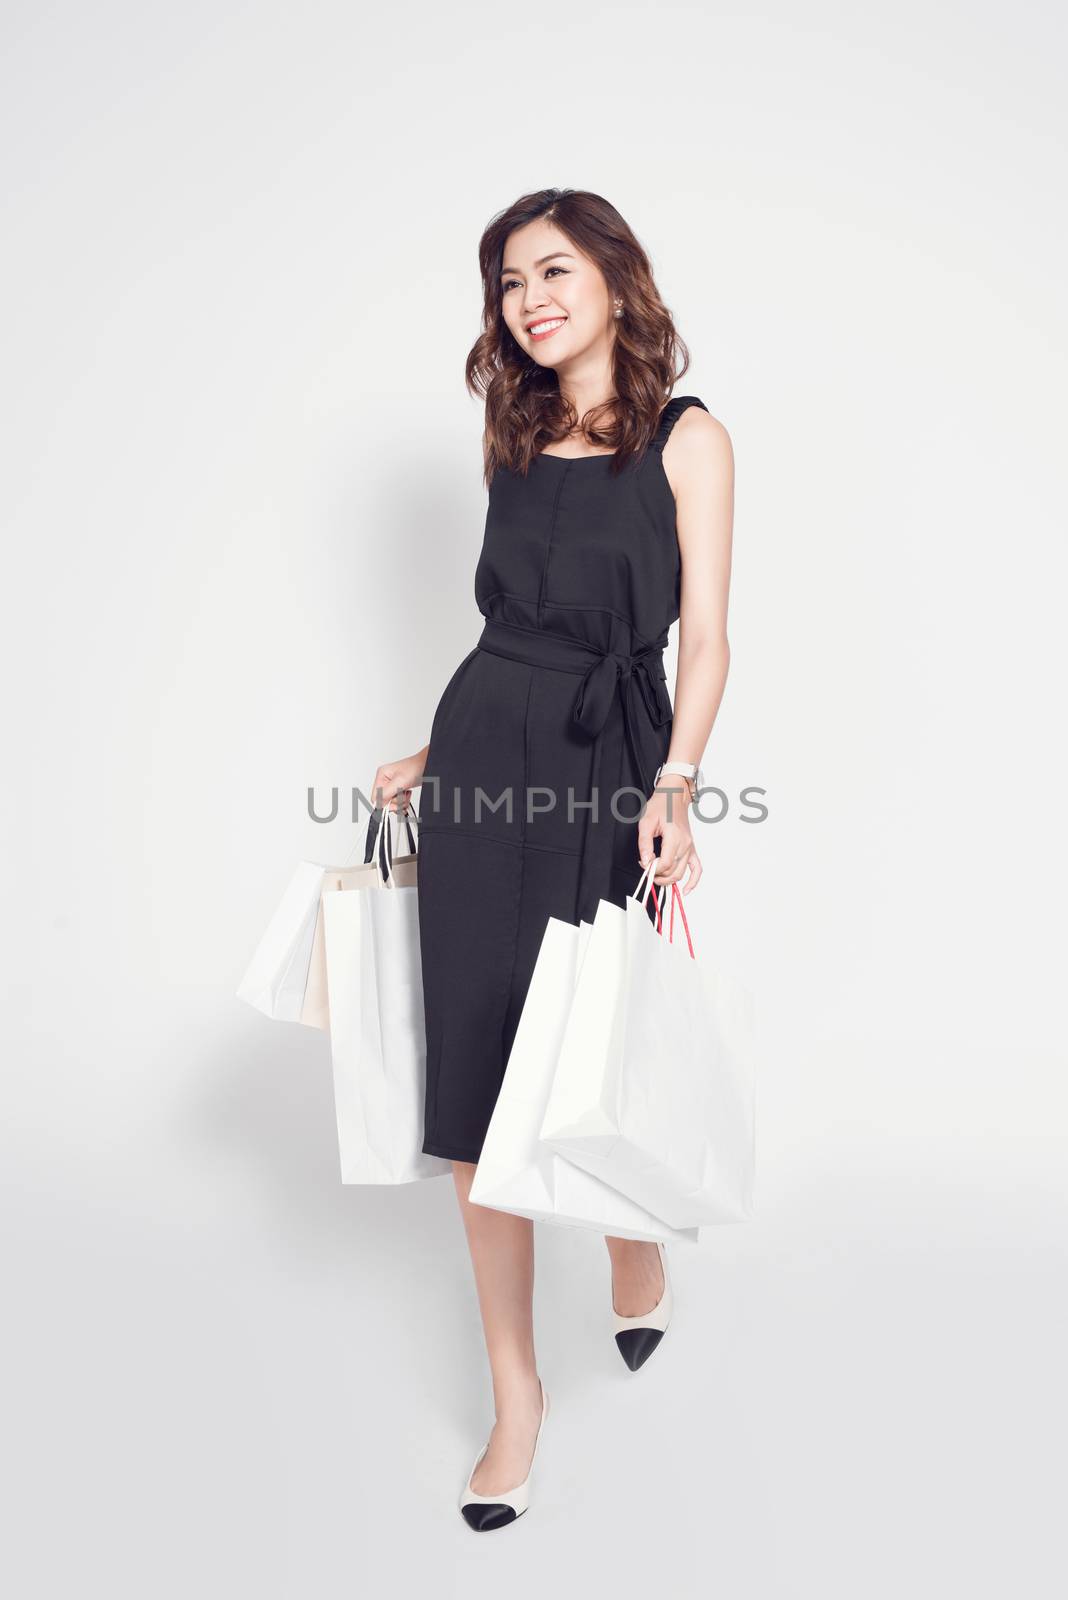 Beautiful asian woman wearing black dress with shopping bag standing over white.